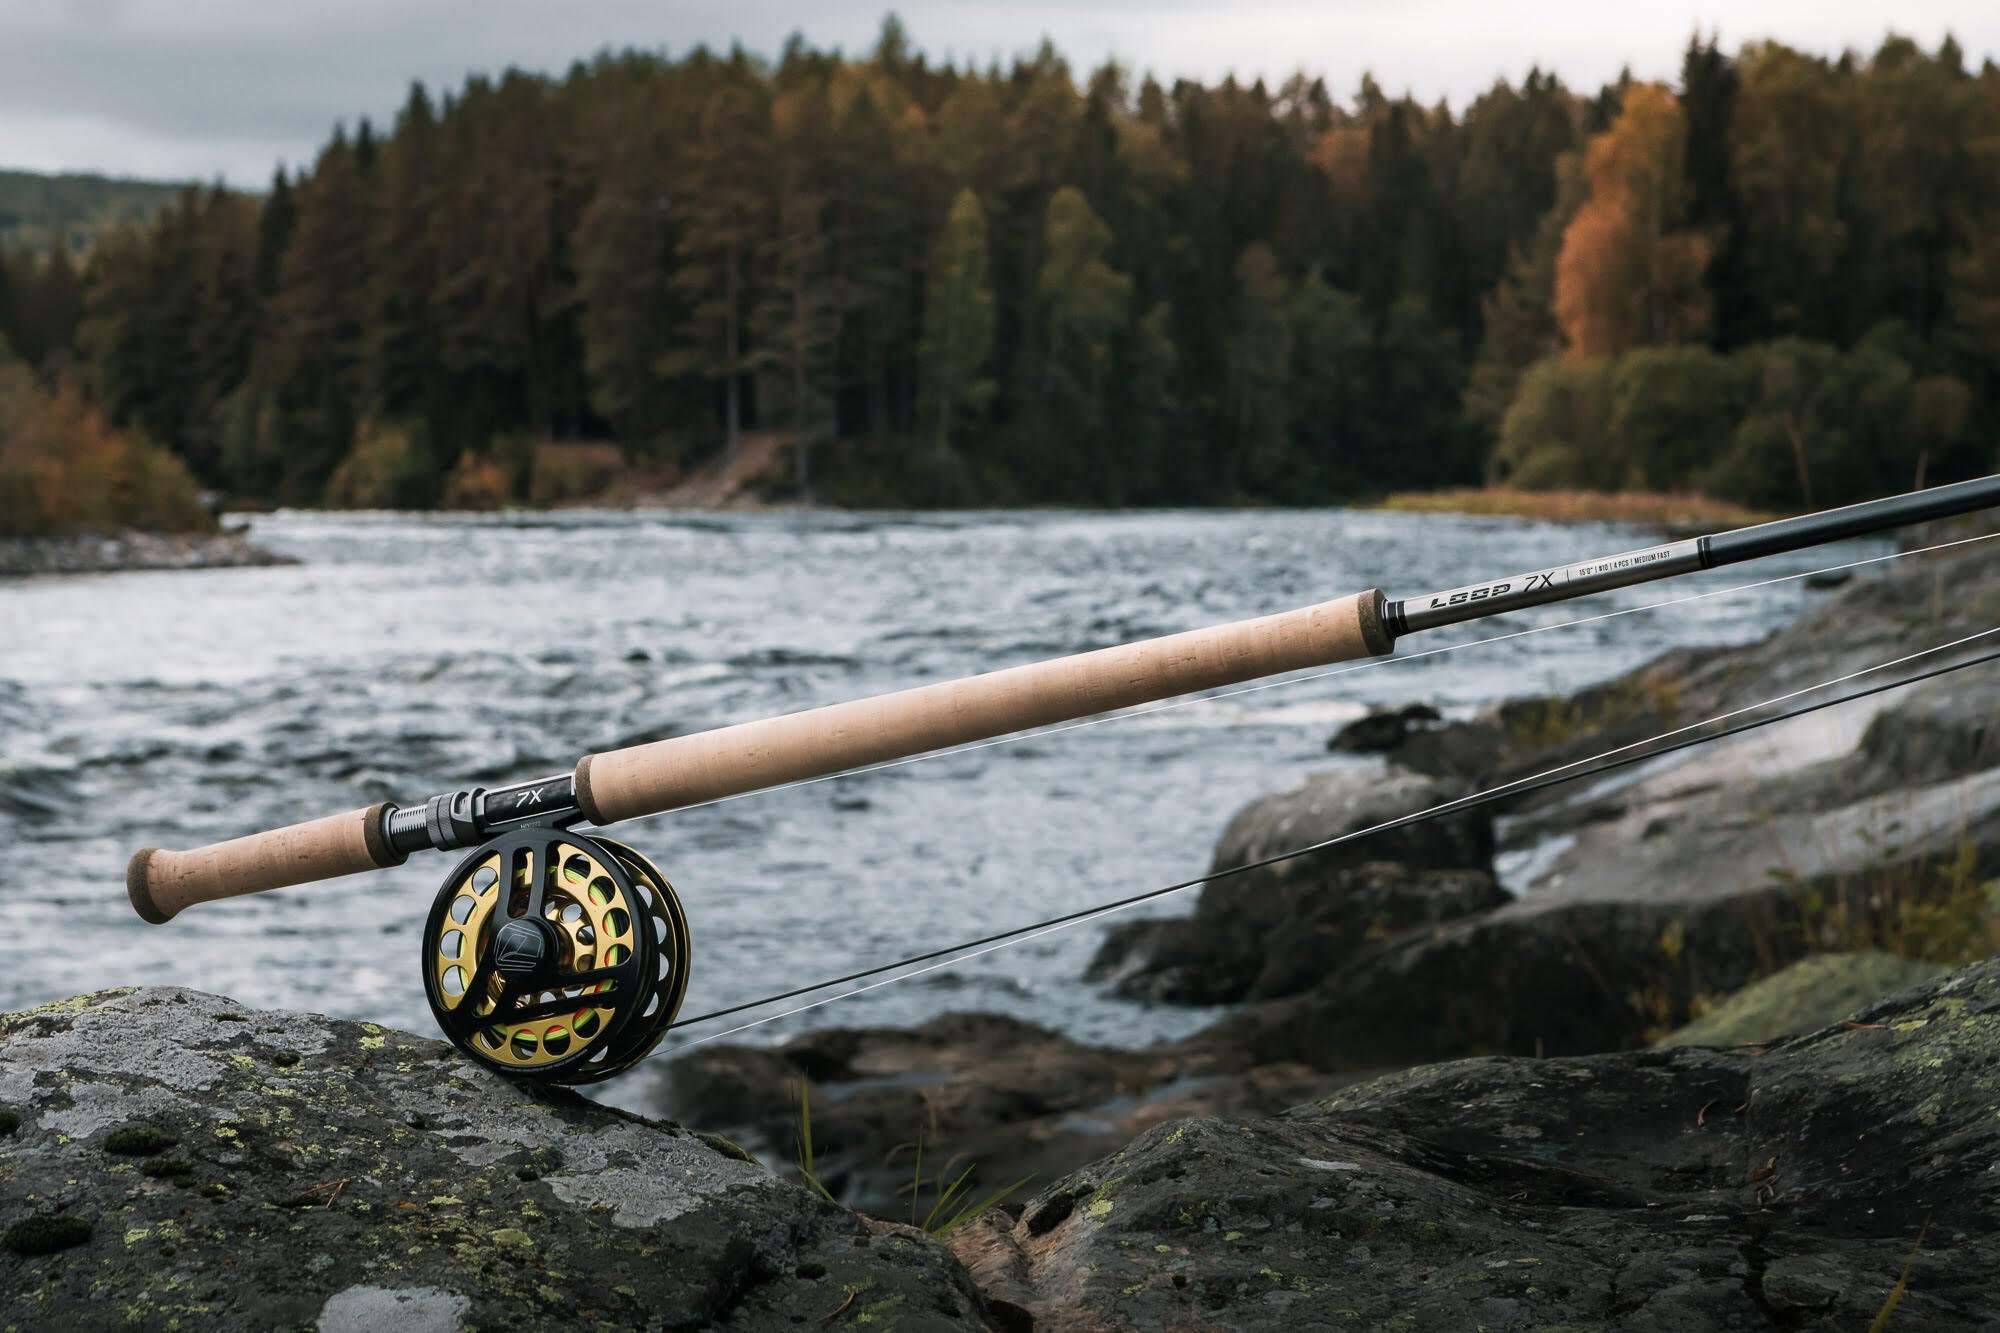 Fly Fishing Rod Review: Unbiased Analysis and Recommendations